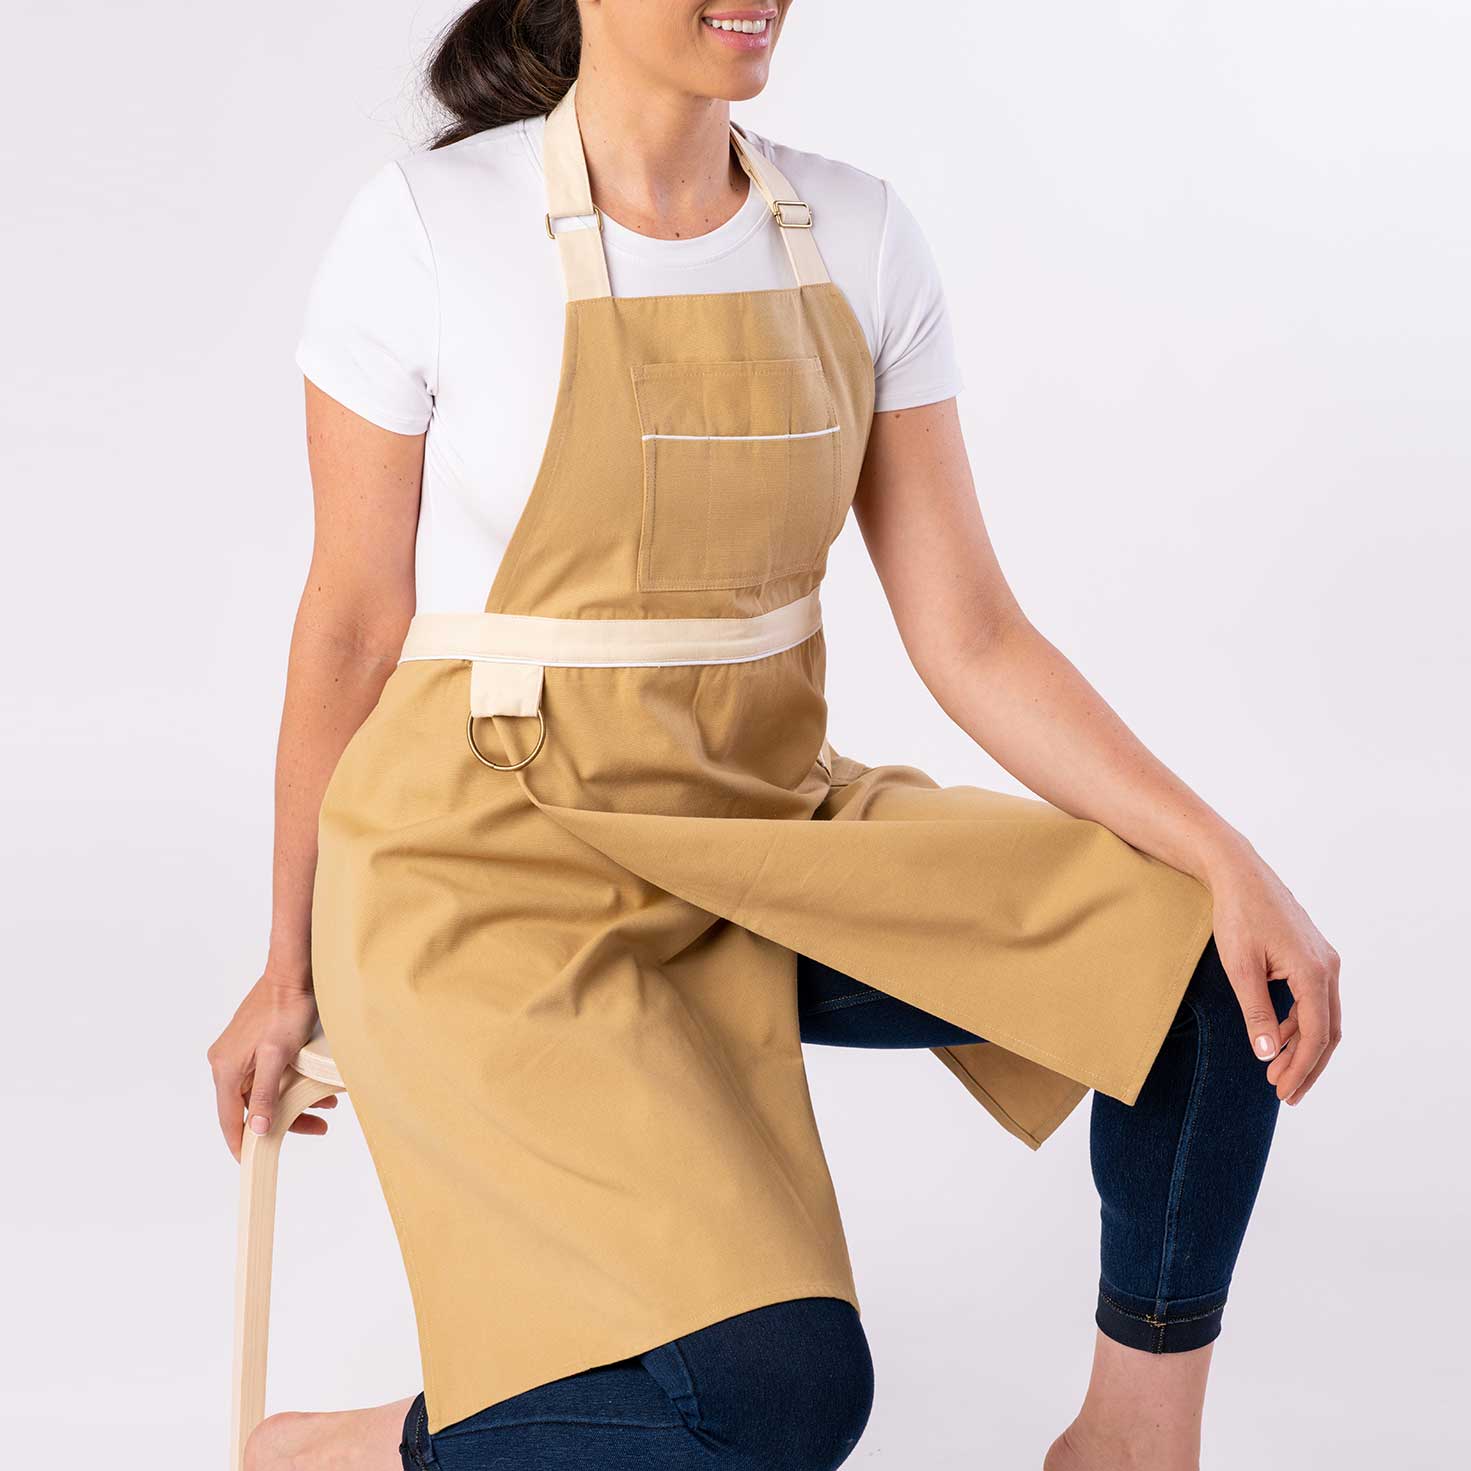 Pottery Apron With Split Leg and Pockets for Pottery Tools